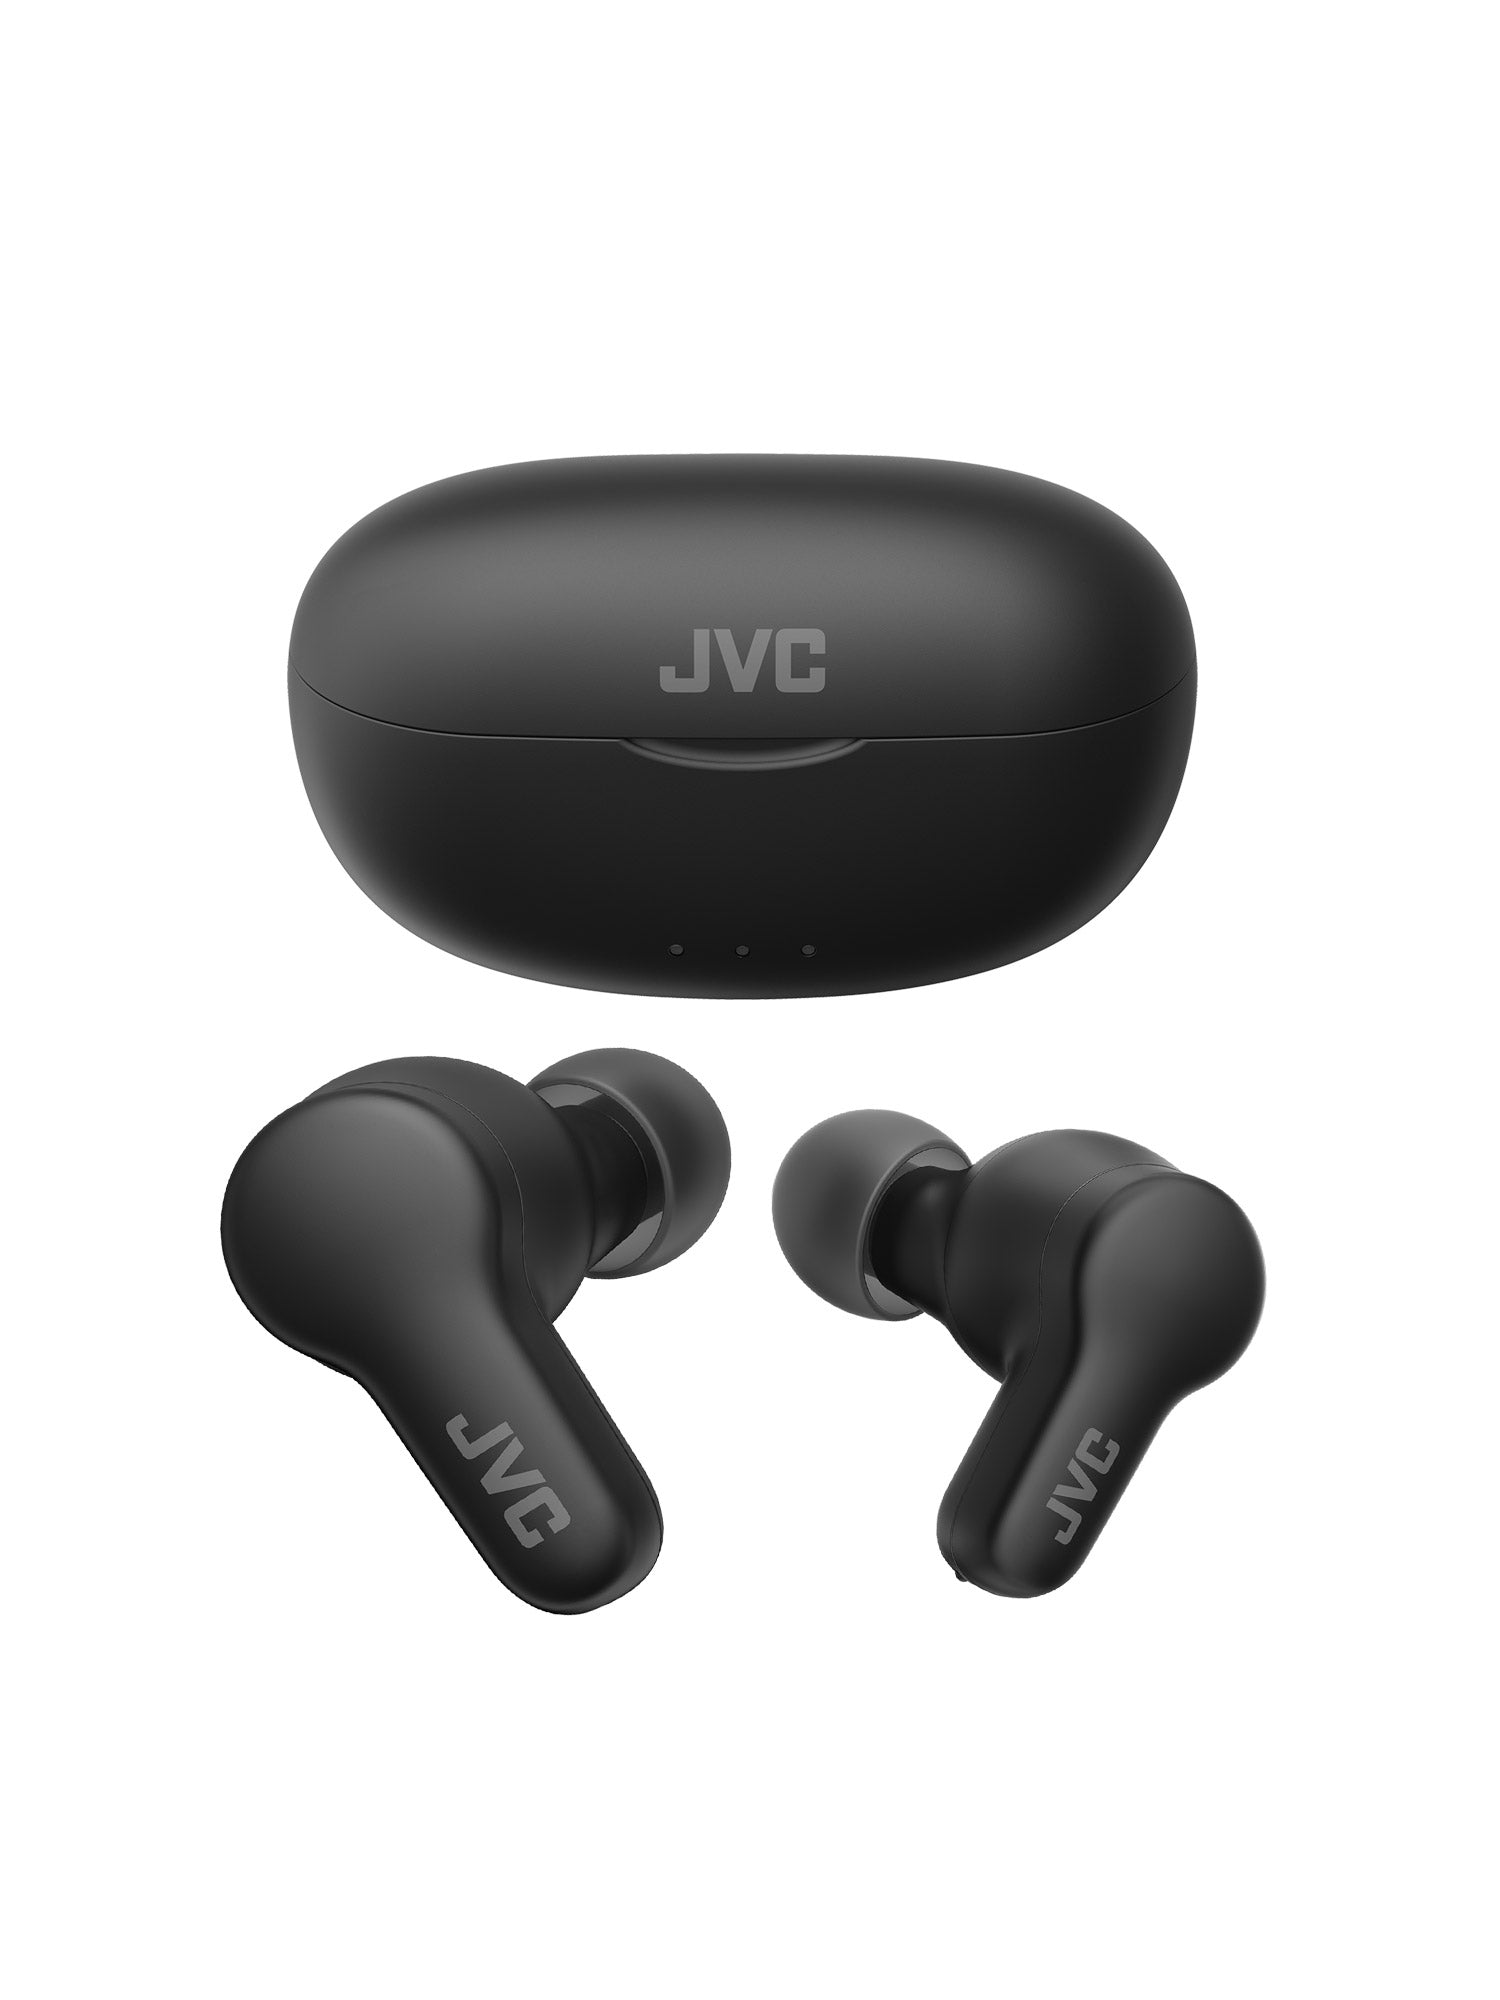 HA-A7T2 in black wireless earbuds and charging case by JVC